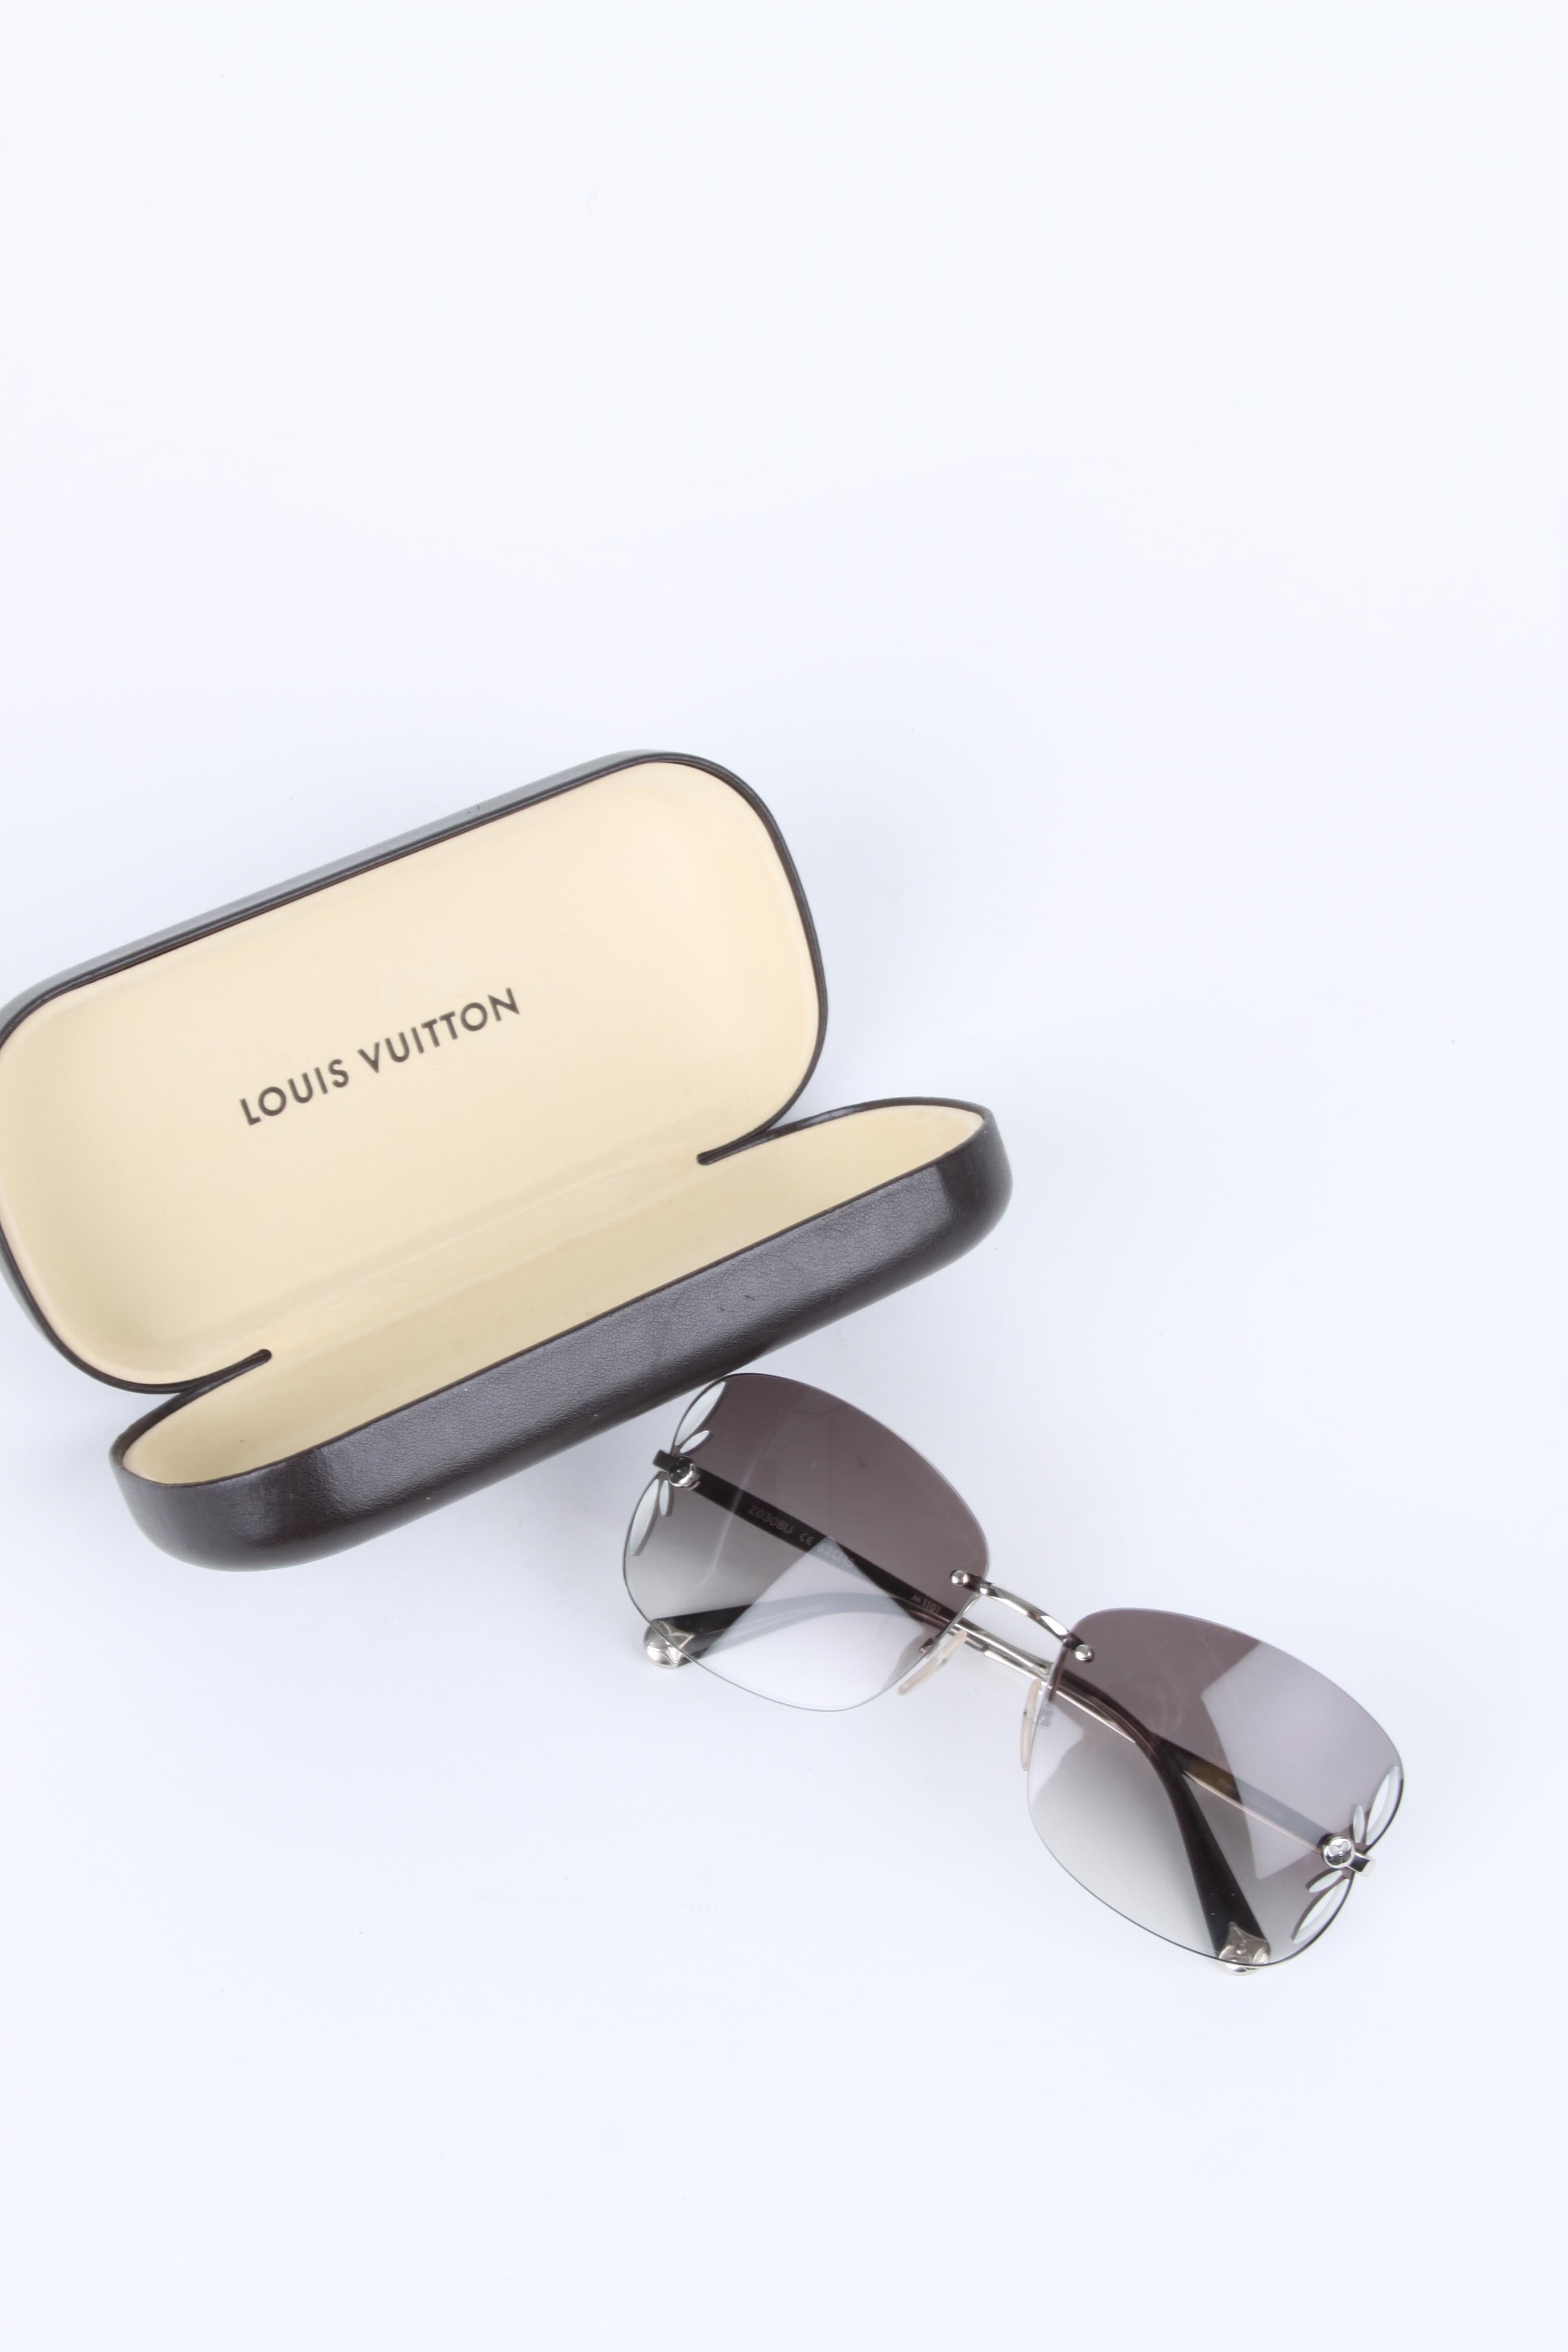 Louis Vuitton Silver/Brown Rimless Lily Sunglasses Z0308U.

These Louis Vuitton Silver/Brown Rimless Lily Sunglasses have a retro but chic appeal. They feature a Monogram flower petal cut out detail on the frames and a frameless design and finishing